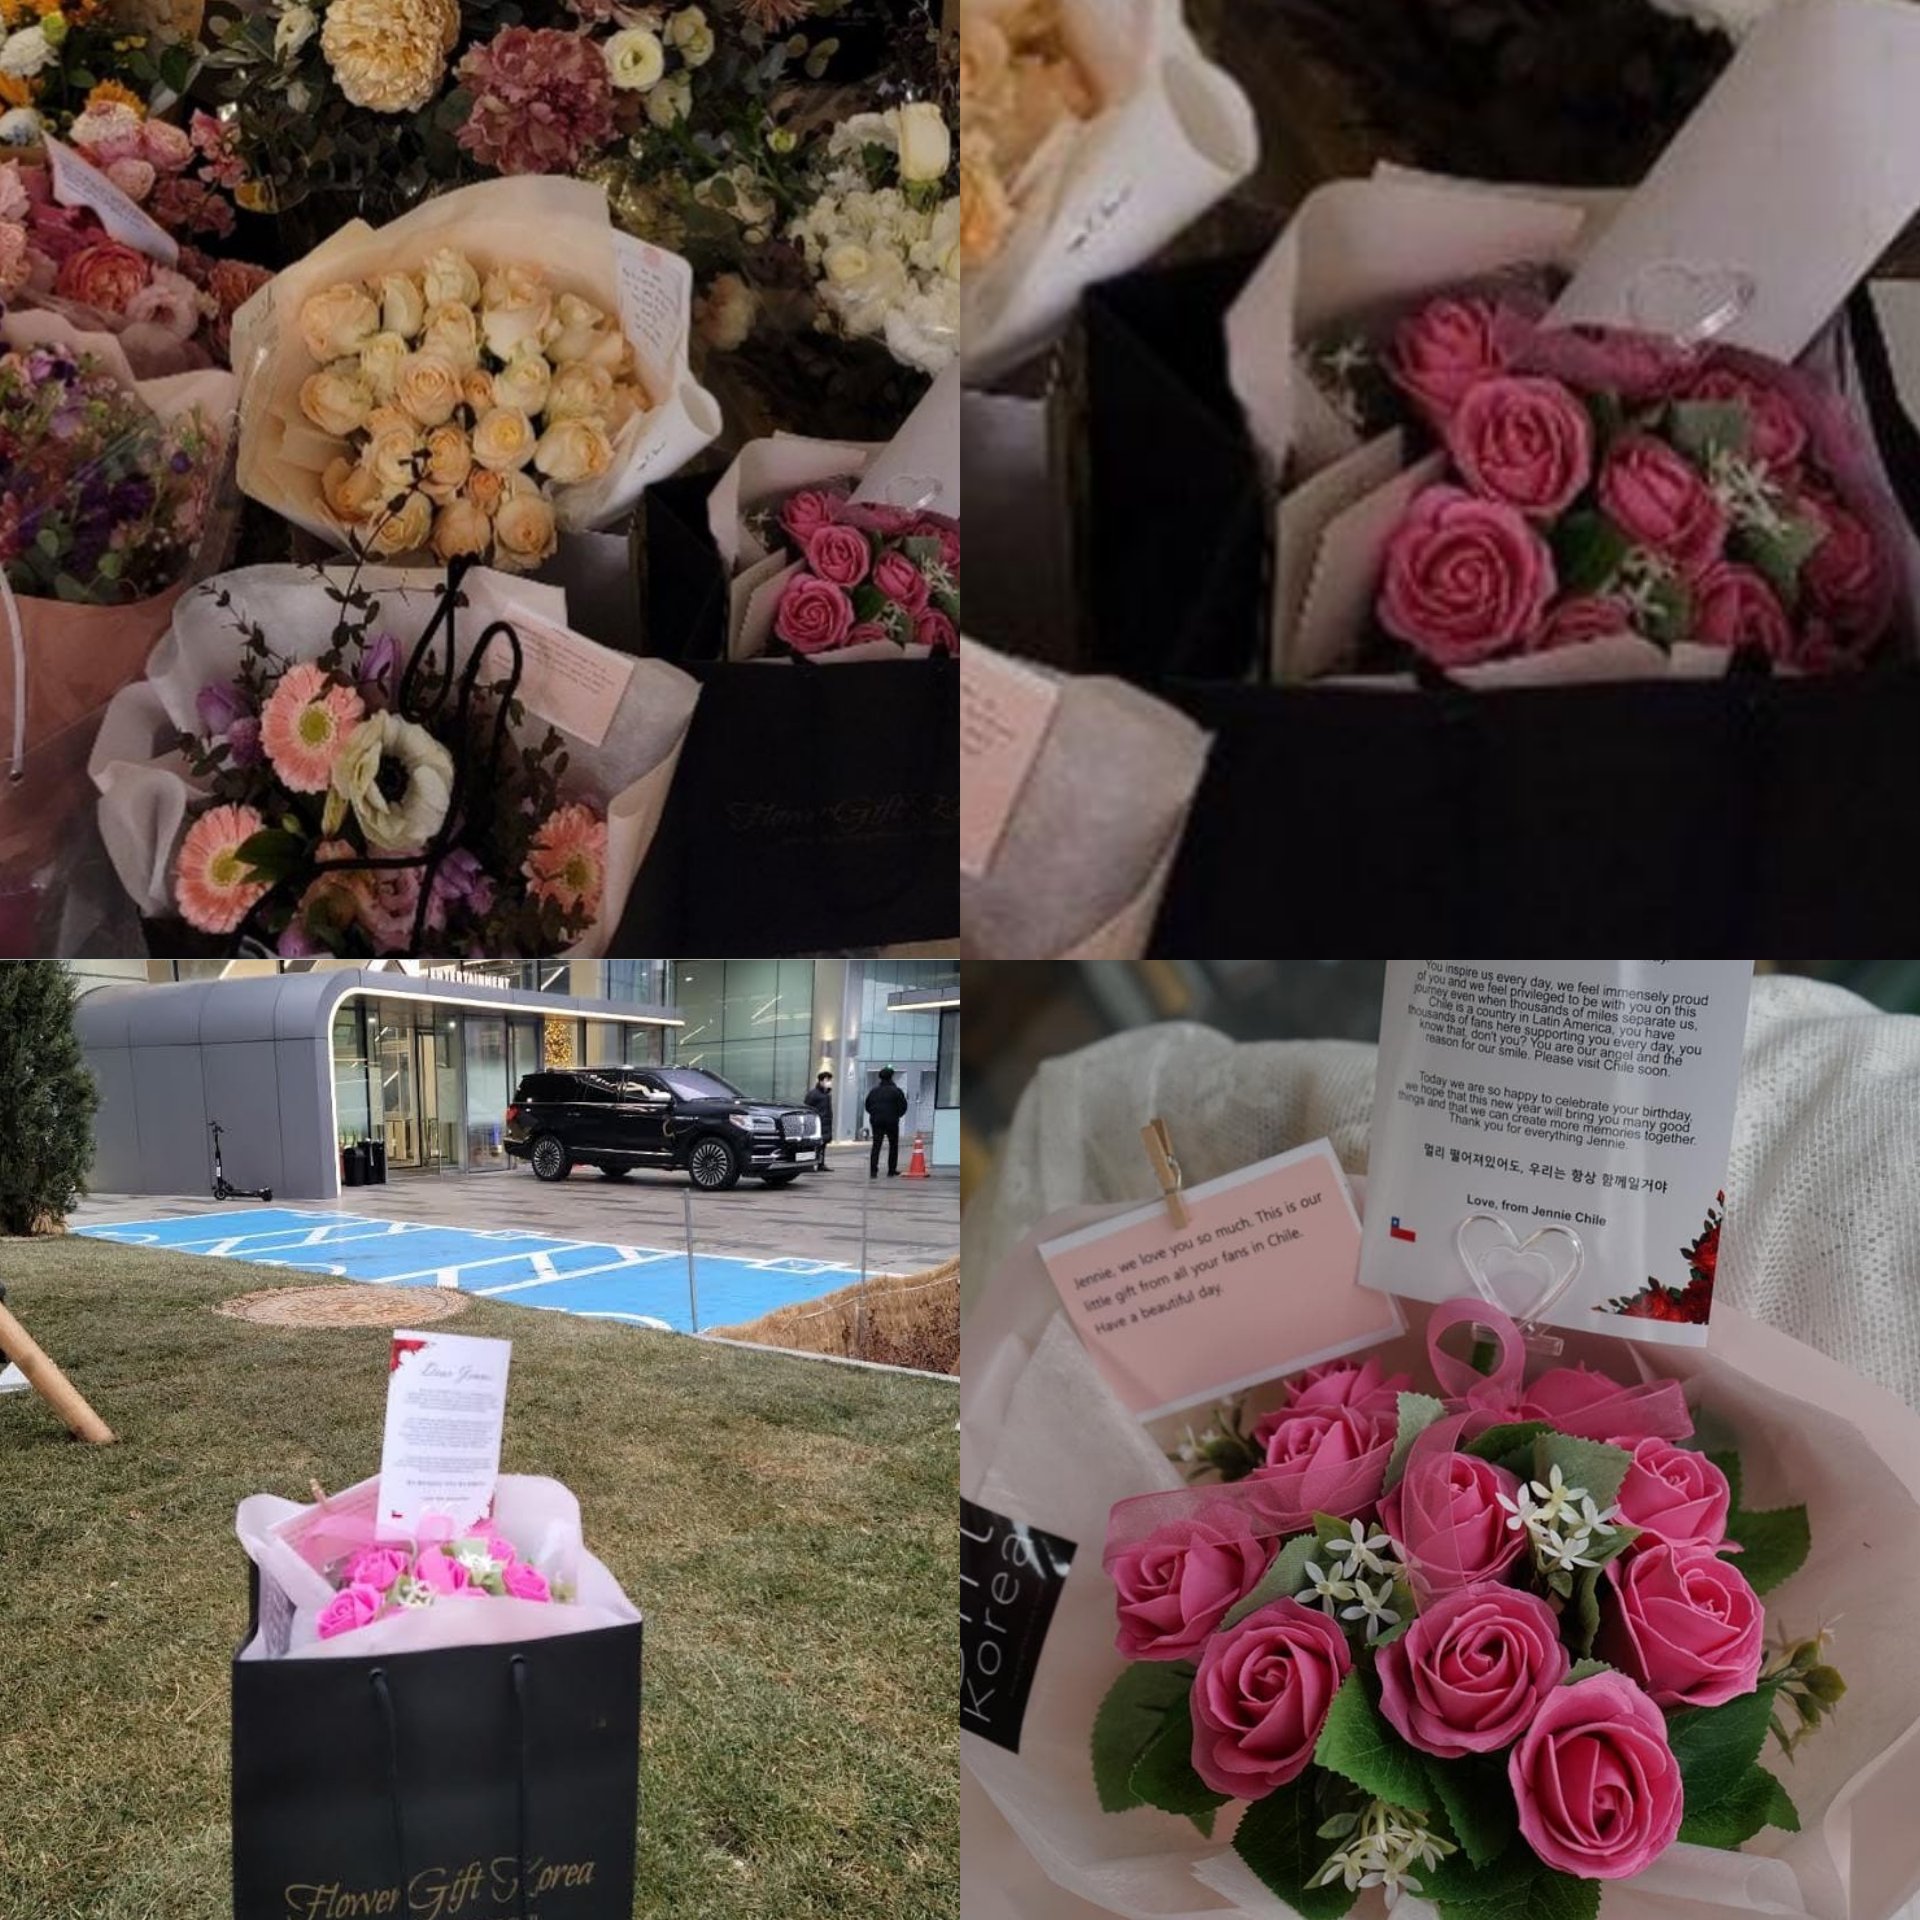 JENNIE CHILE 🍒 on X: Chanel sent Jennie gifts, flowers and a cake for her  birthday.🤍🥹  / X